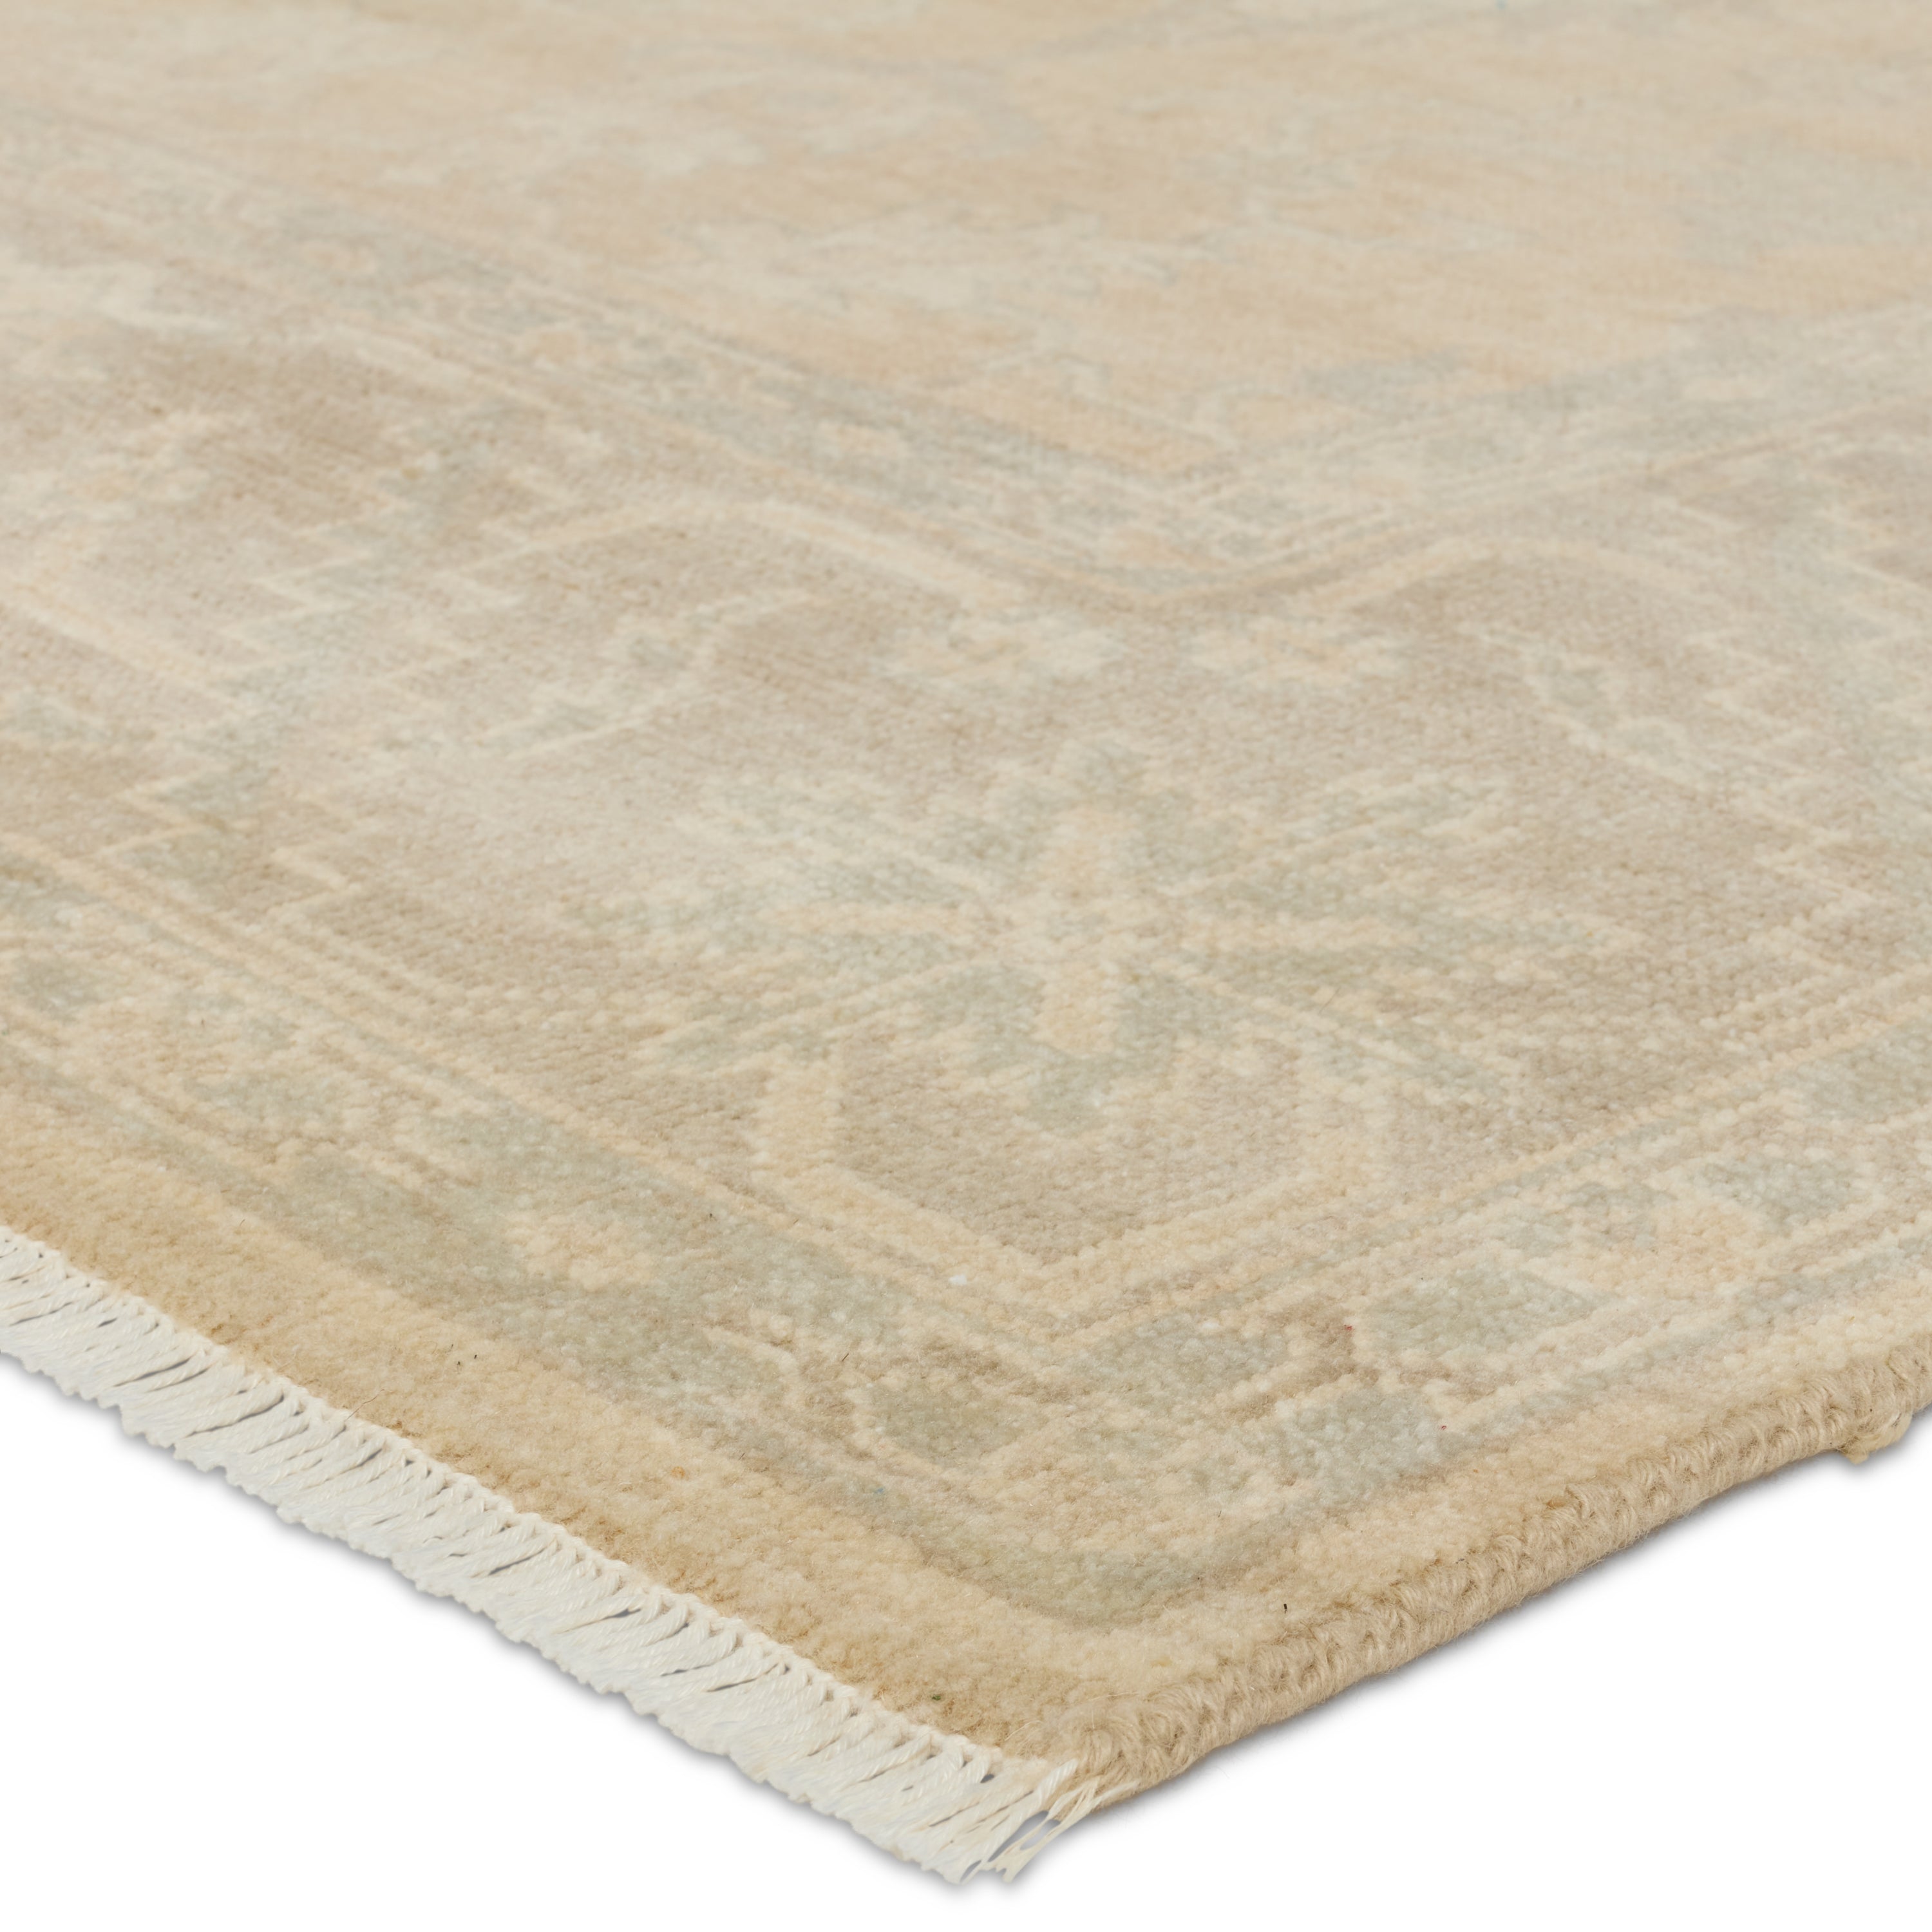 The Eloquent collection emanates traditional elegance, lending a soft and serene look to transitional homes. The Verity area rug features a faded Oushak design cream, gray, and light sage tones. This hand-knotted wool and viscose rug grounds living spaces with a classic, earthy look. Amethyst Home provides interior design, new construction, custom furniture, and area rugs in the Kansas City metro area.